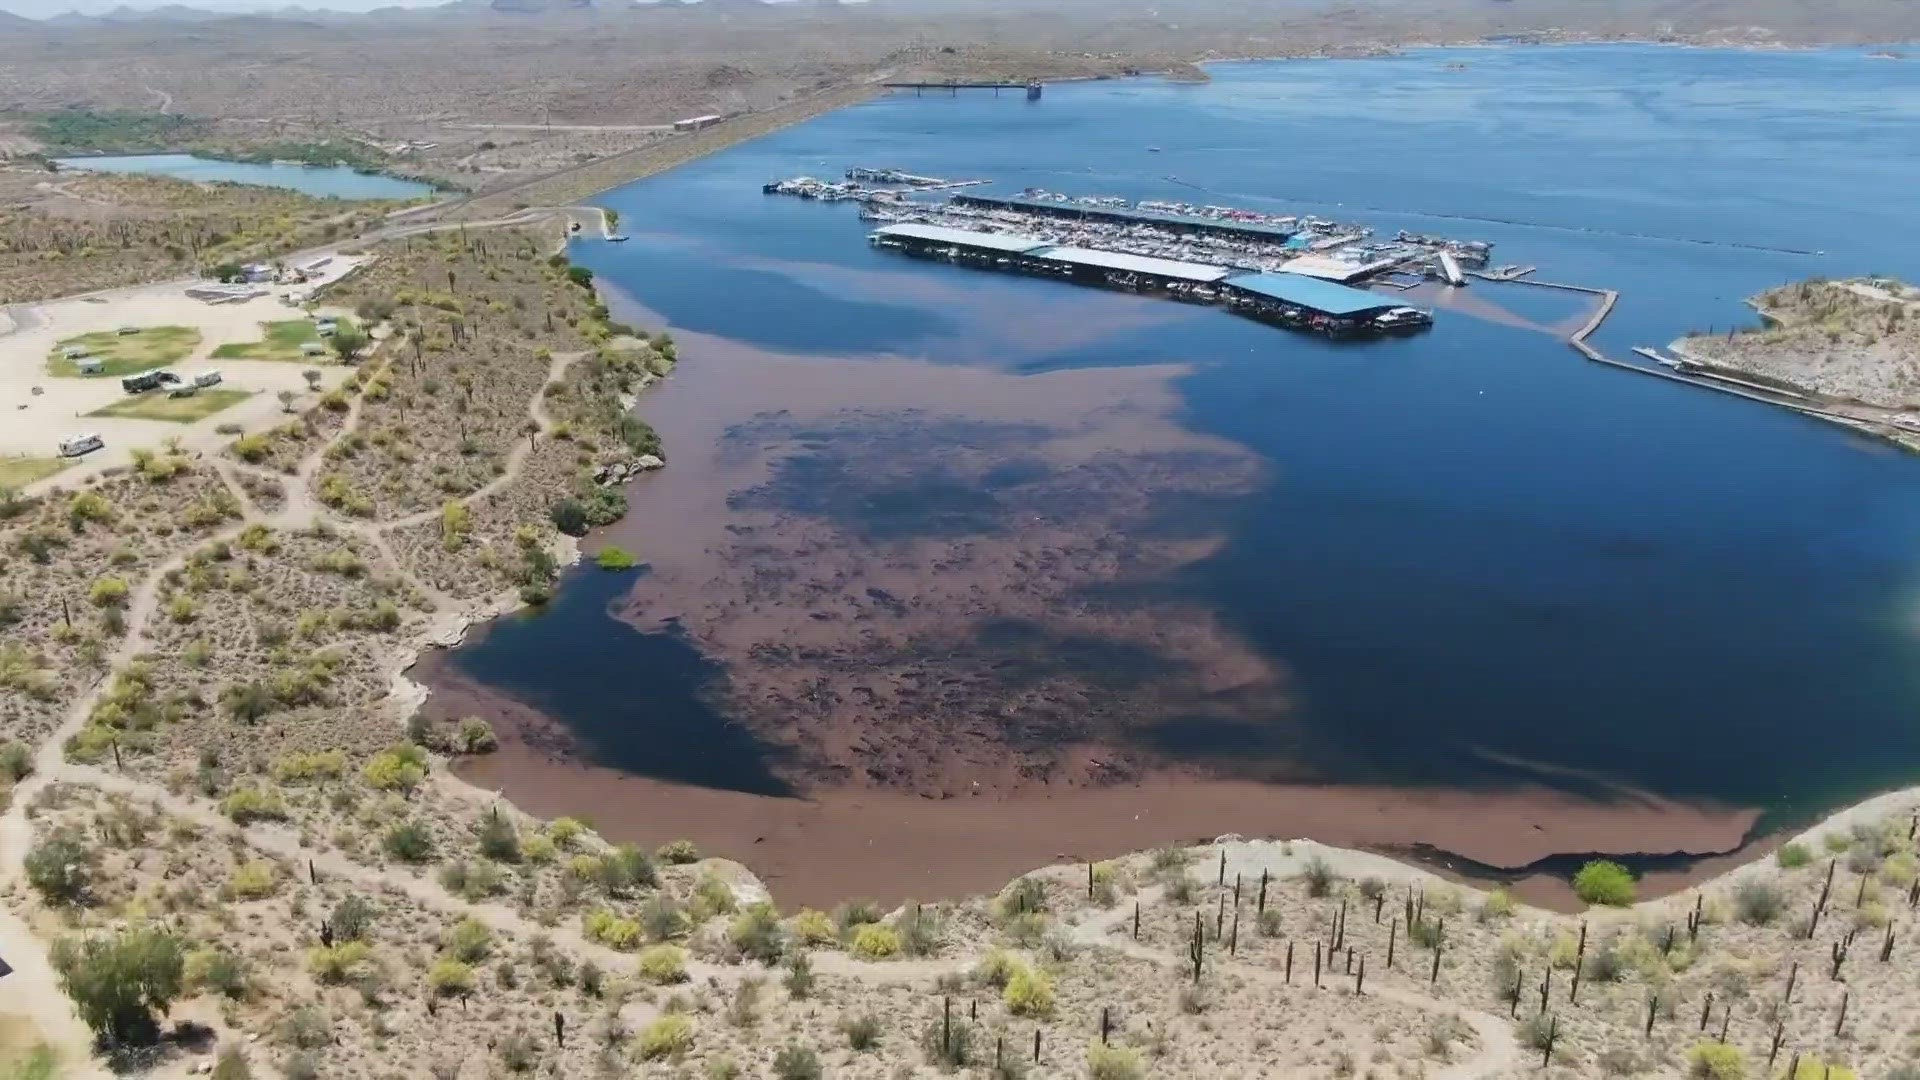 Lake Pleasant is dealing with a pretty disgusting-looking problem – huge floating patches of debris collecting near the marinas and boat launches.